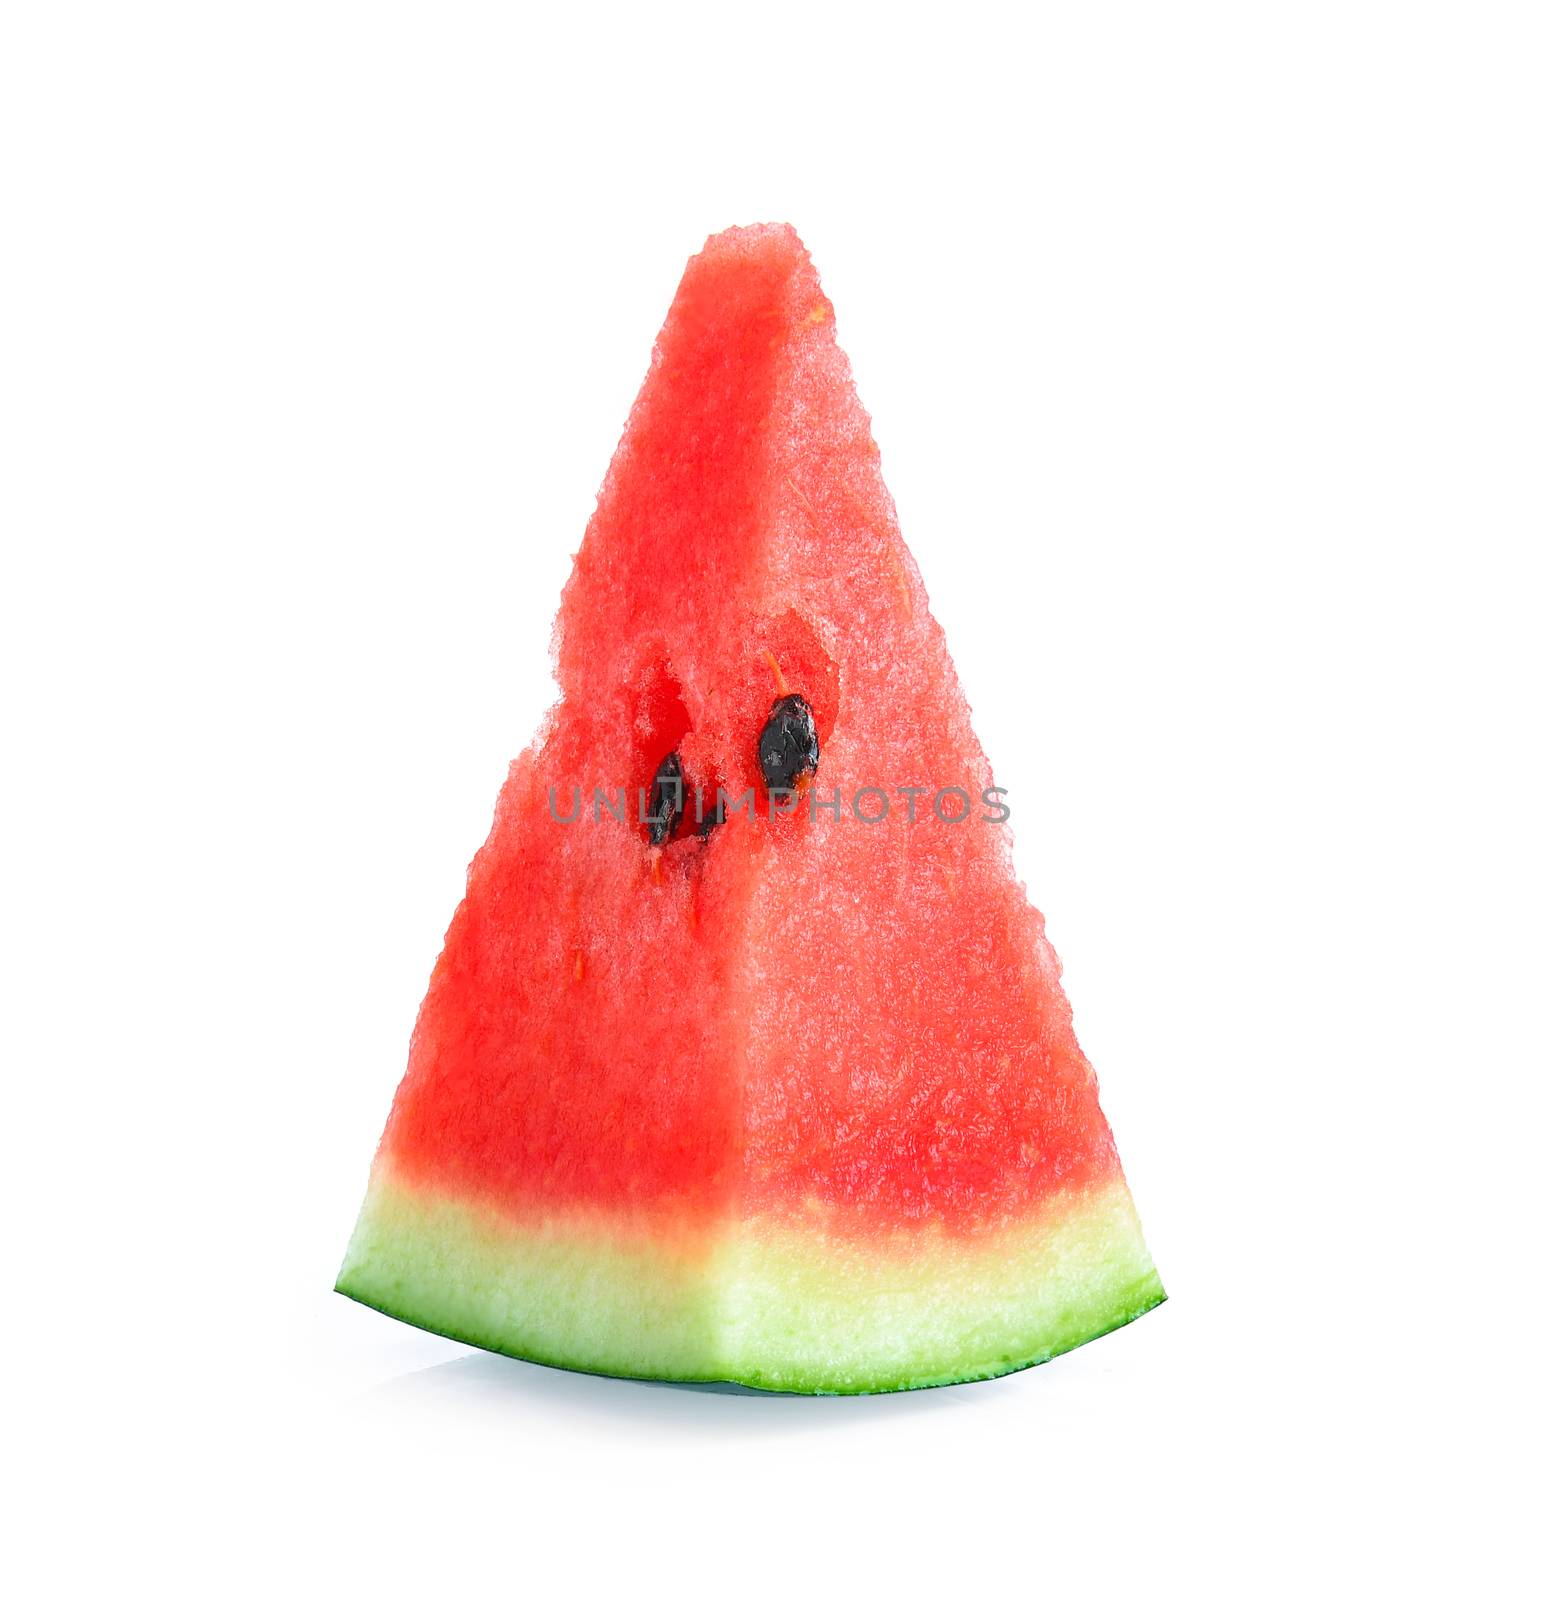 Sliced of watermelon isolated on white background. by sommai